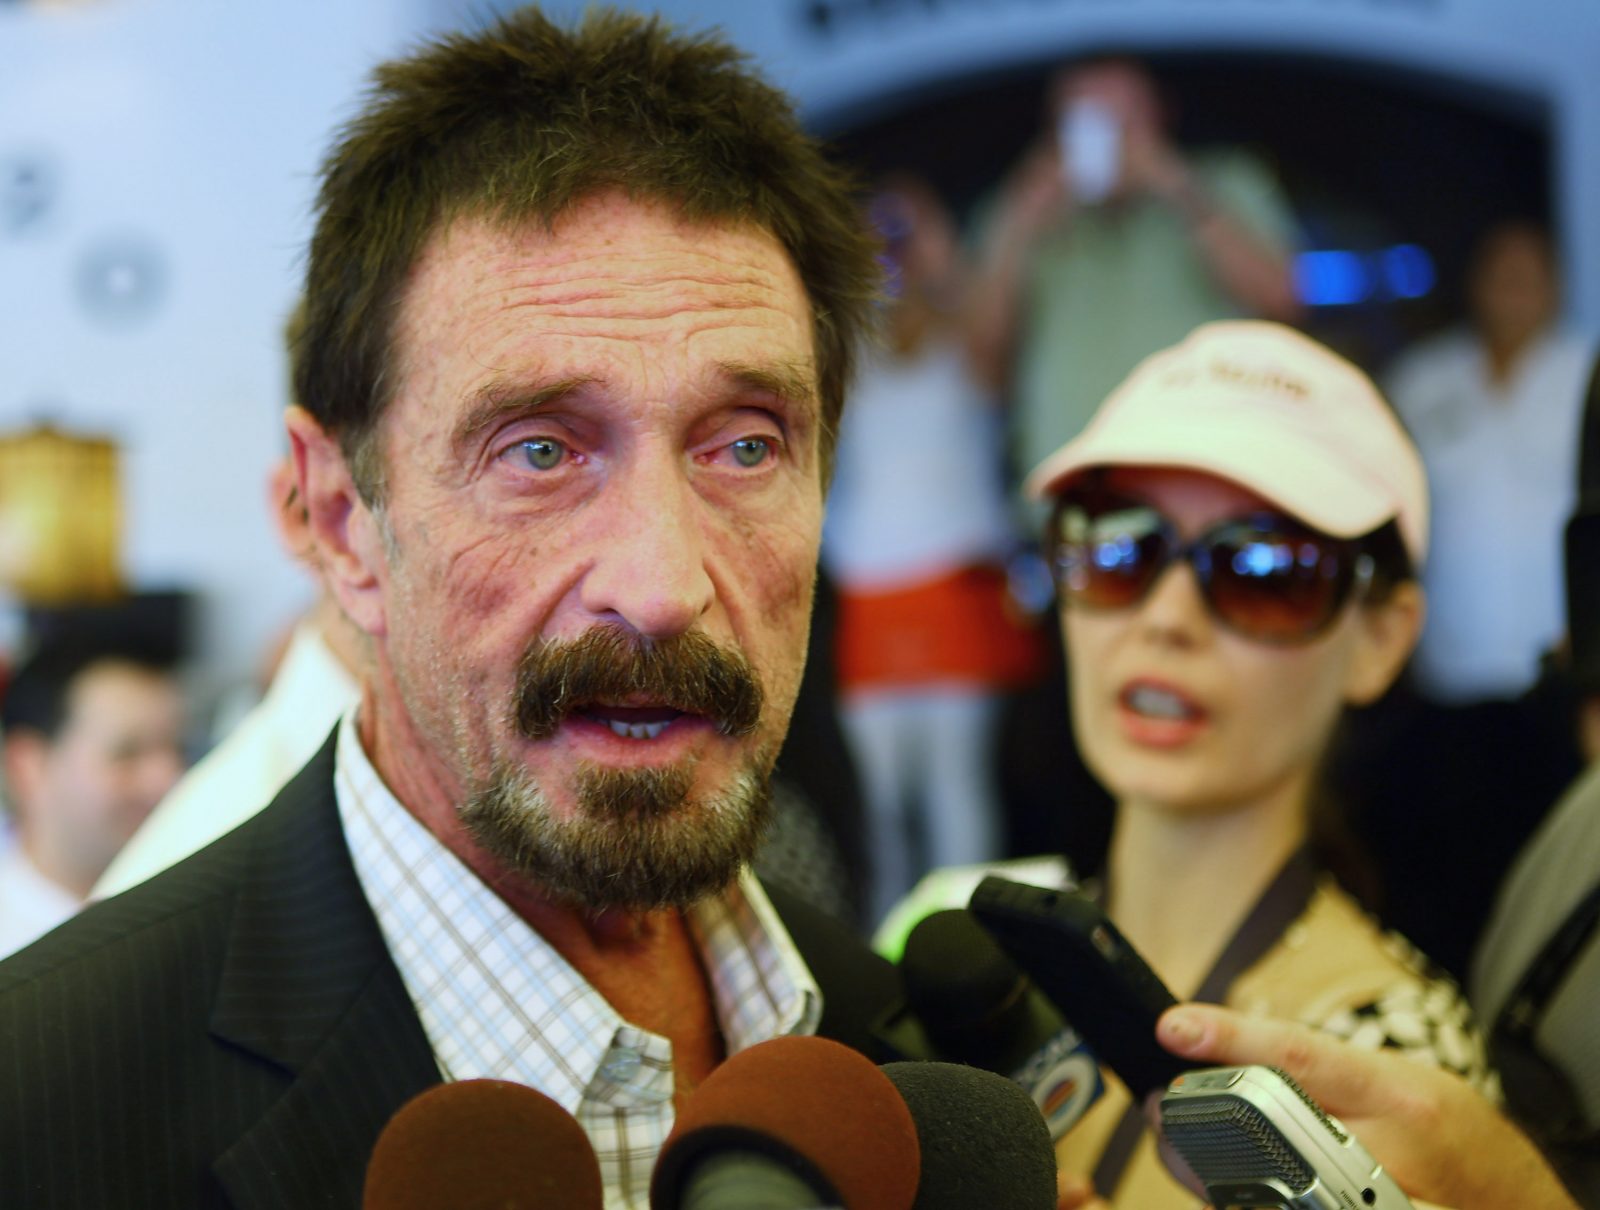 John Mcafee On Life In Prison And The Price Of Dogecoin Cityam Cityam